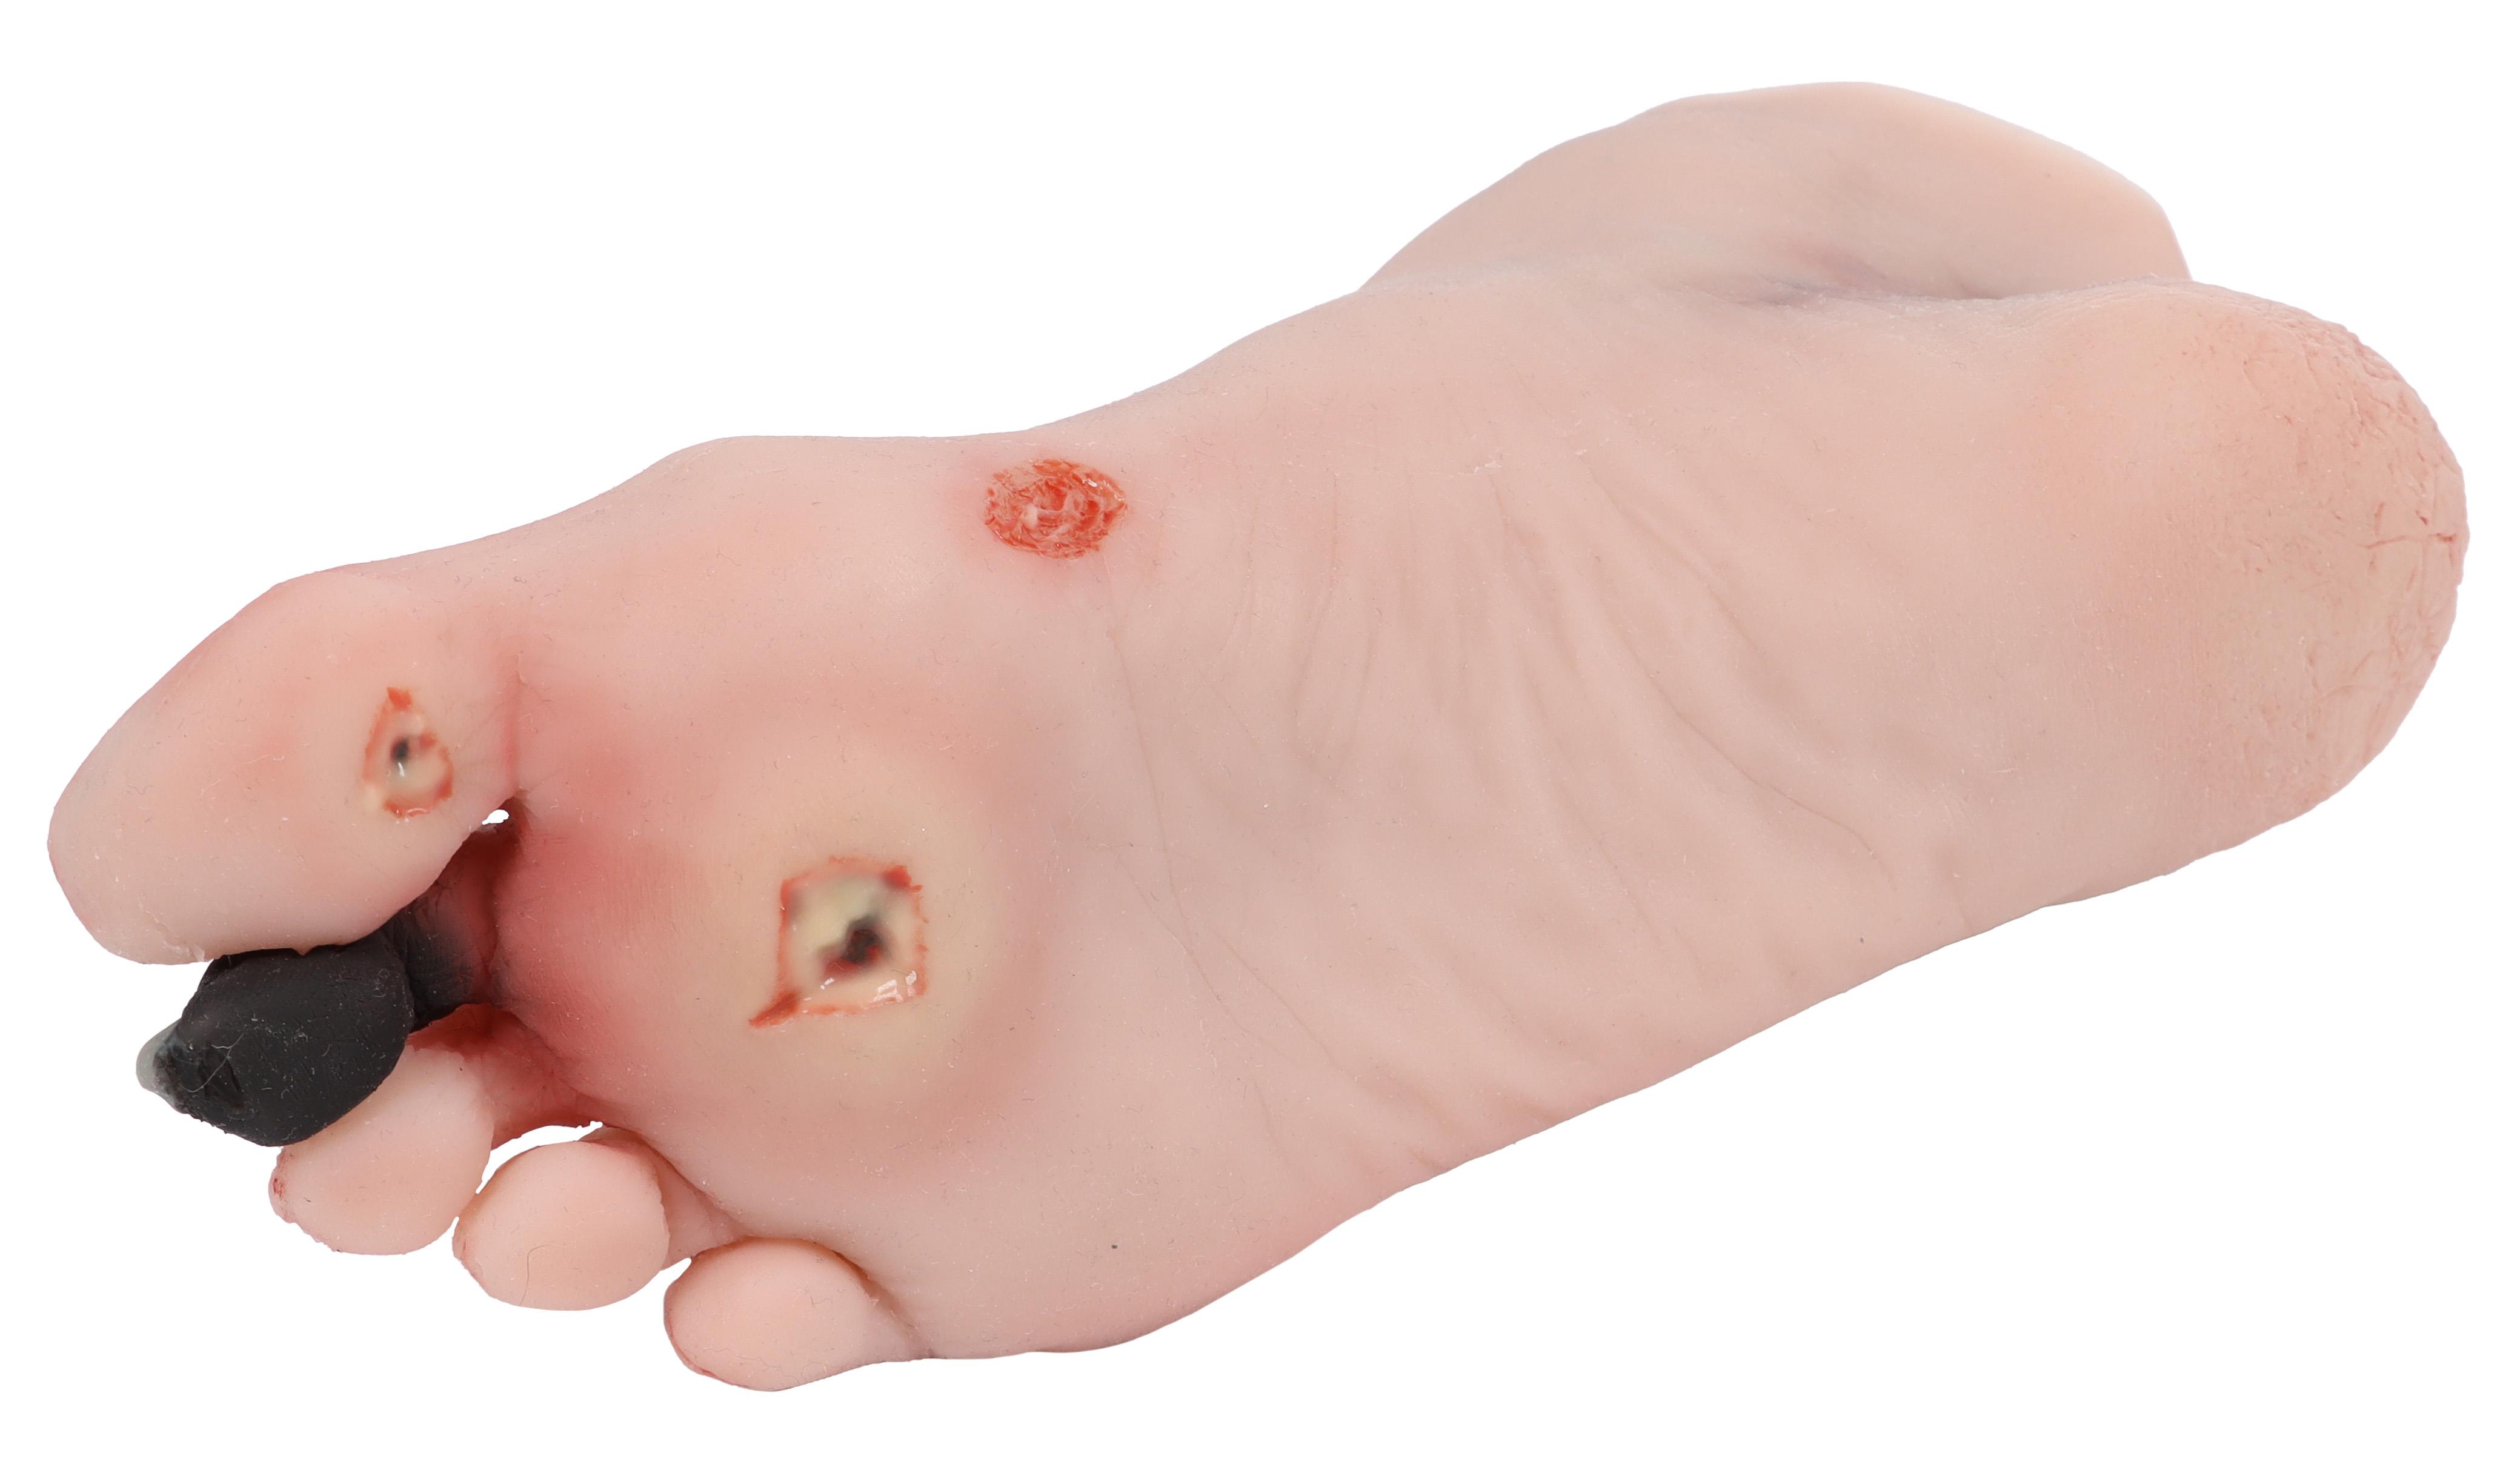 Wound-foot-with-diabetic-foot-syndrome-3